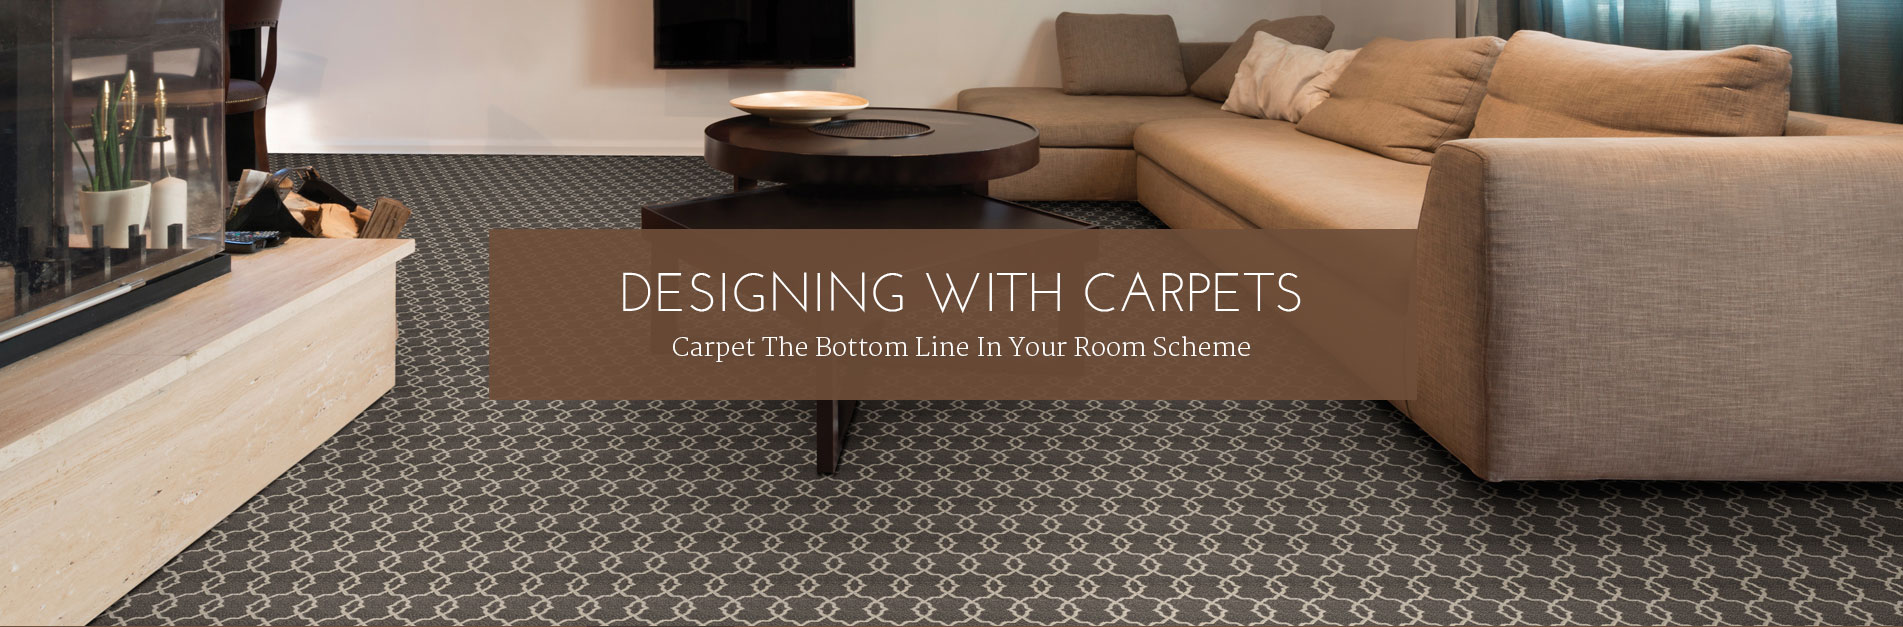 Designing With Carpet Couristan